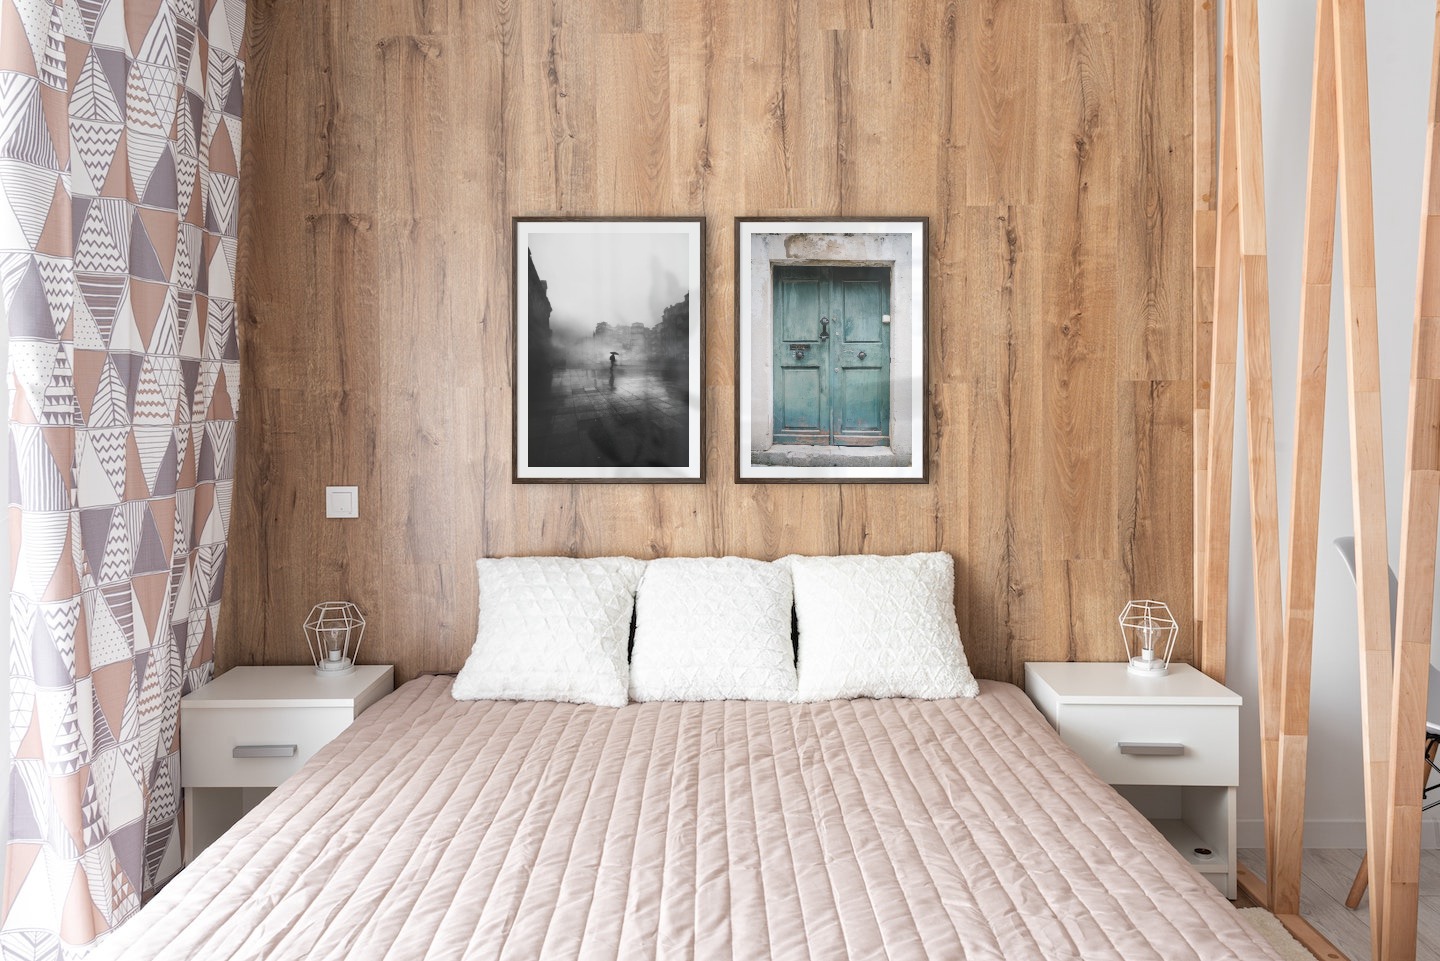 Gallery wall with picture frames in dark wood in sizes 50x70 with prints "Rainy city" and "Door"